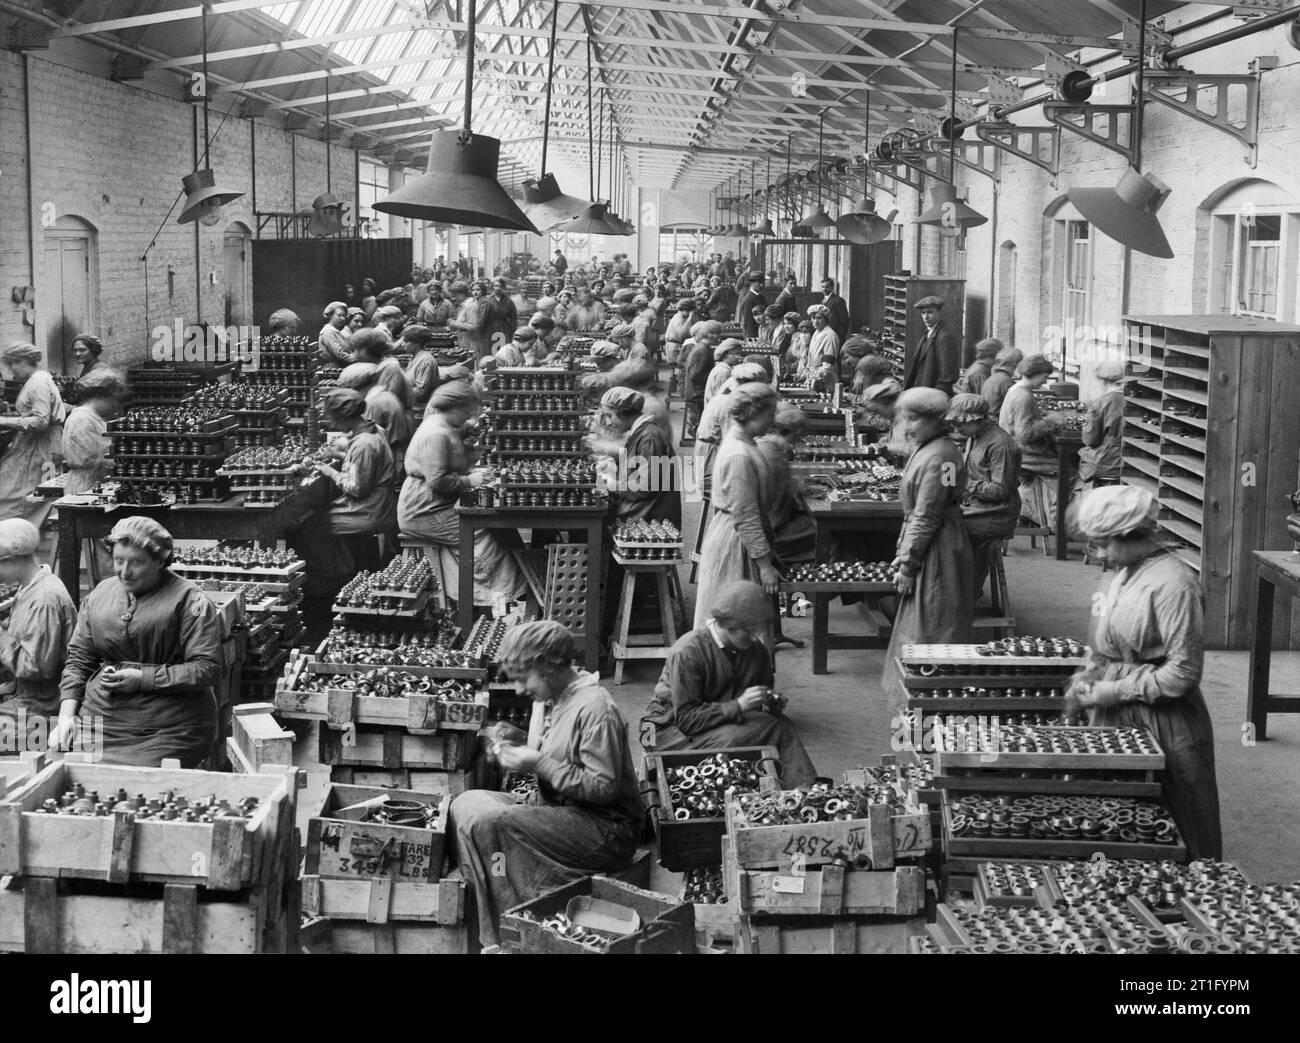 Women at work during the First World War Rows of women sit at benches as they arrange fuse heads in one of 'England's great gun factories', possibly Coventry Ordnance Works. Stock Photo